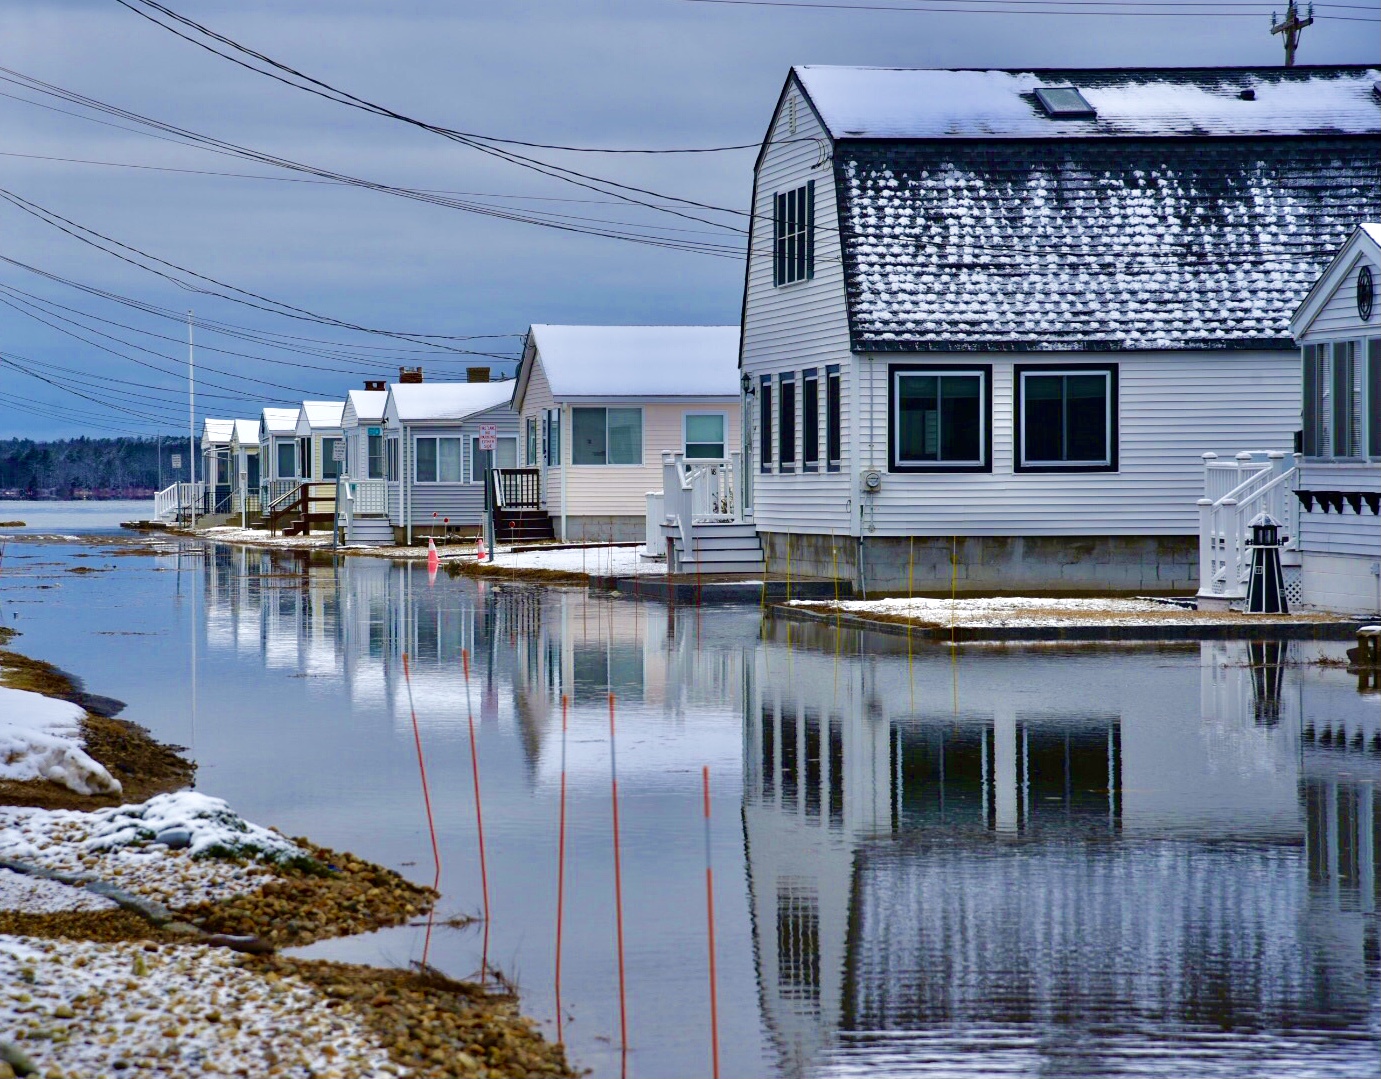 A row of homes reflected into the water on the road in front of them. Snow covers their roofs.